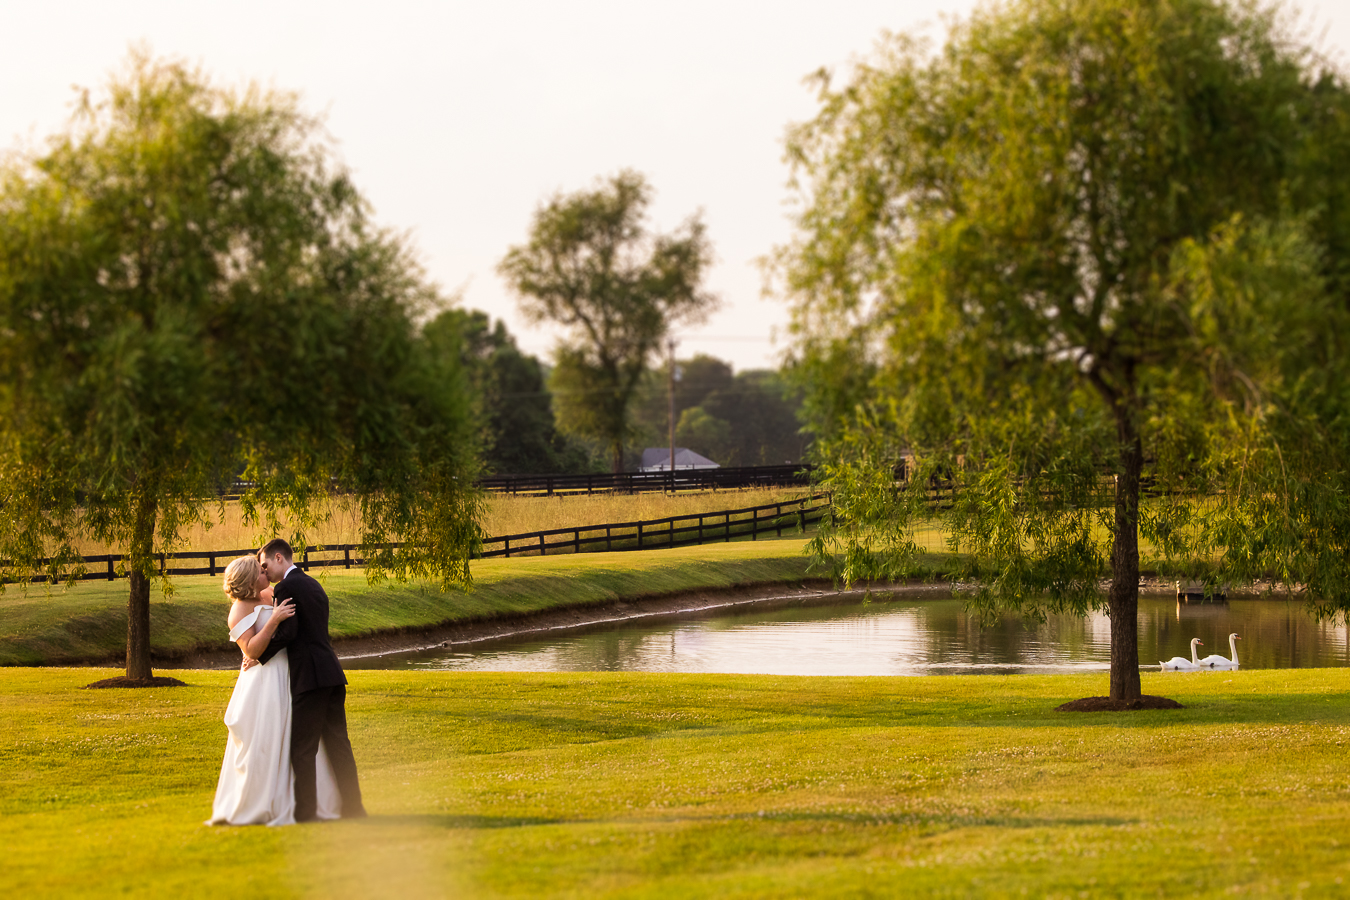 Middleburg Barn Wedding Photographer, rhinehart photography, captures this vibrant, colorful image of the bride and groom as they embrace each other and kiss one another in the field and in front of a pond with the swans